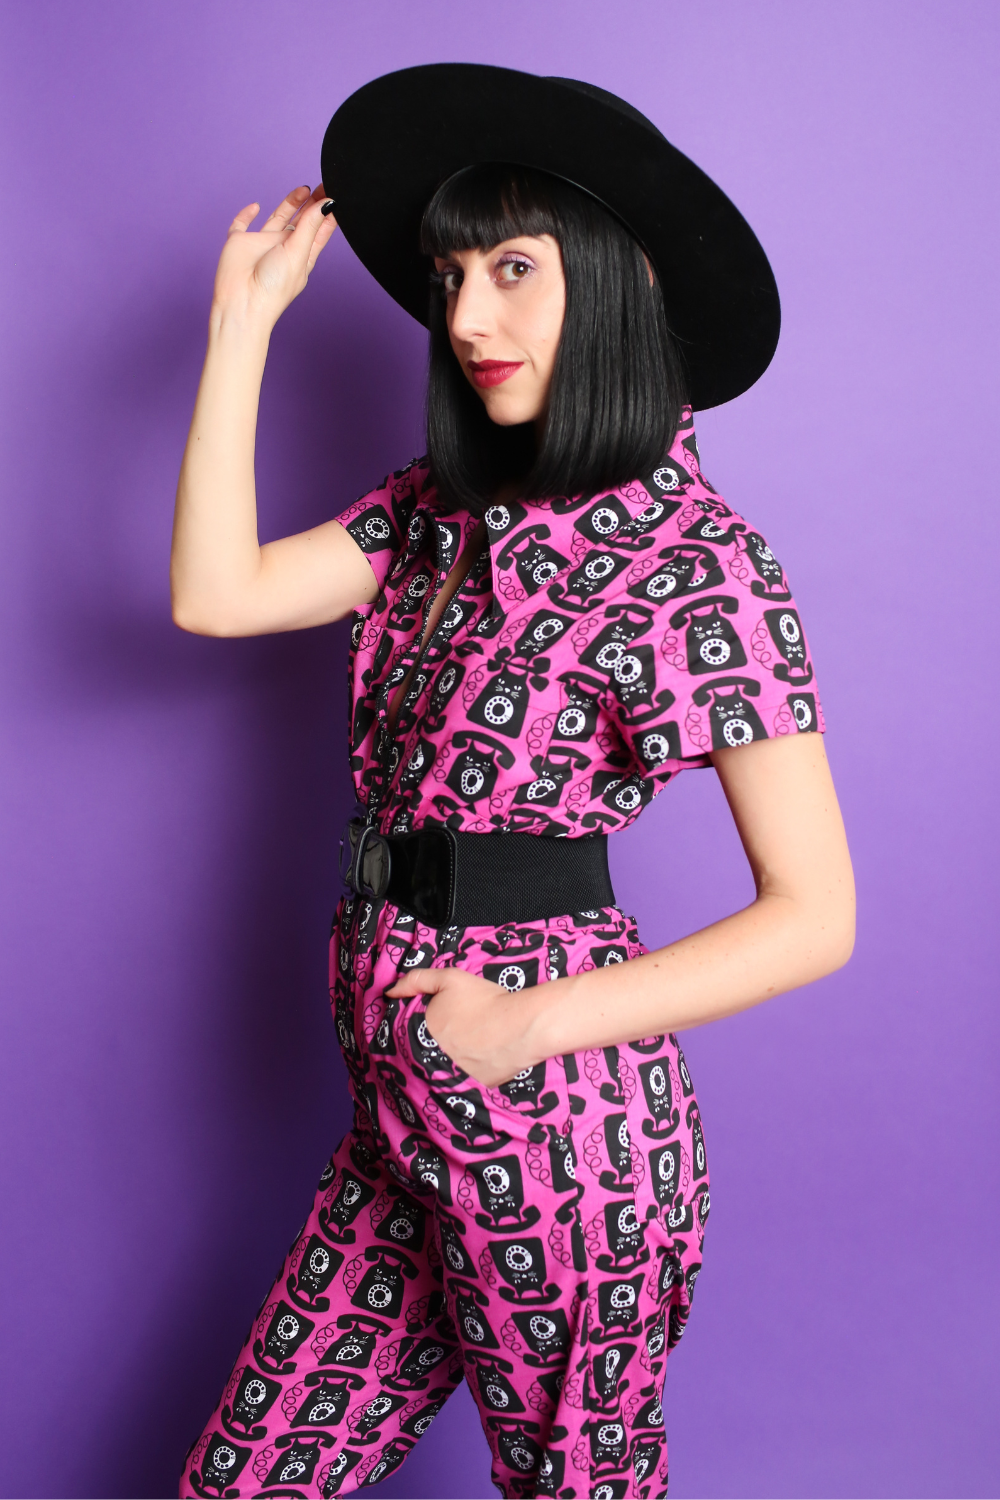 Black haired model in black hat and pink and black printed jumpsuit, side view